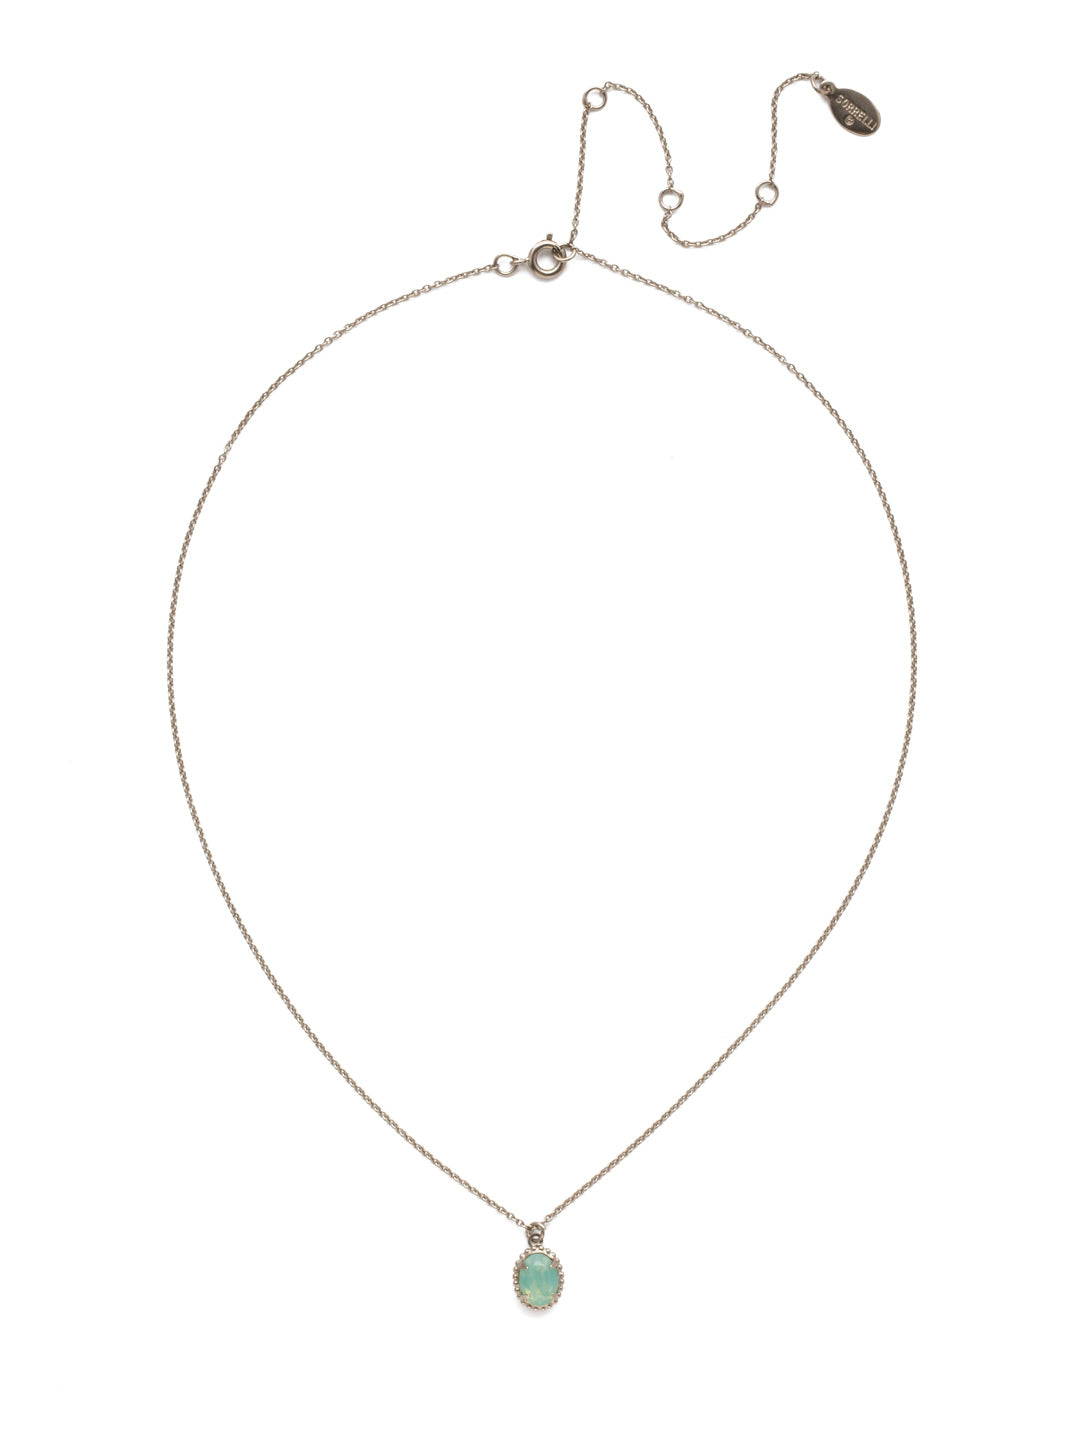 Maisie Pendant Necklace - NEF49ASPAC - This is the perfect day-to-night sparkling tiny pendant necklace that has an adjustable chain to fit your neckline. From Sorrelli's Pacific Opal collection in our Antique Silver-tone finish.